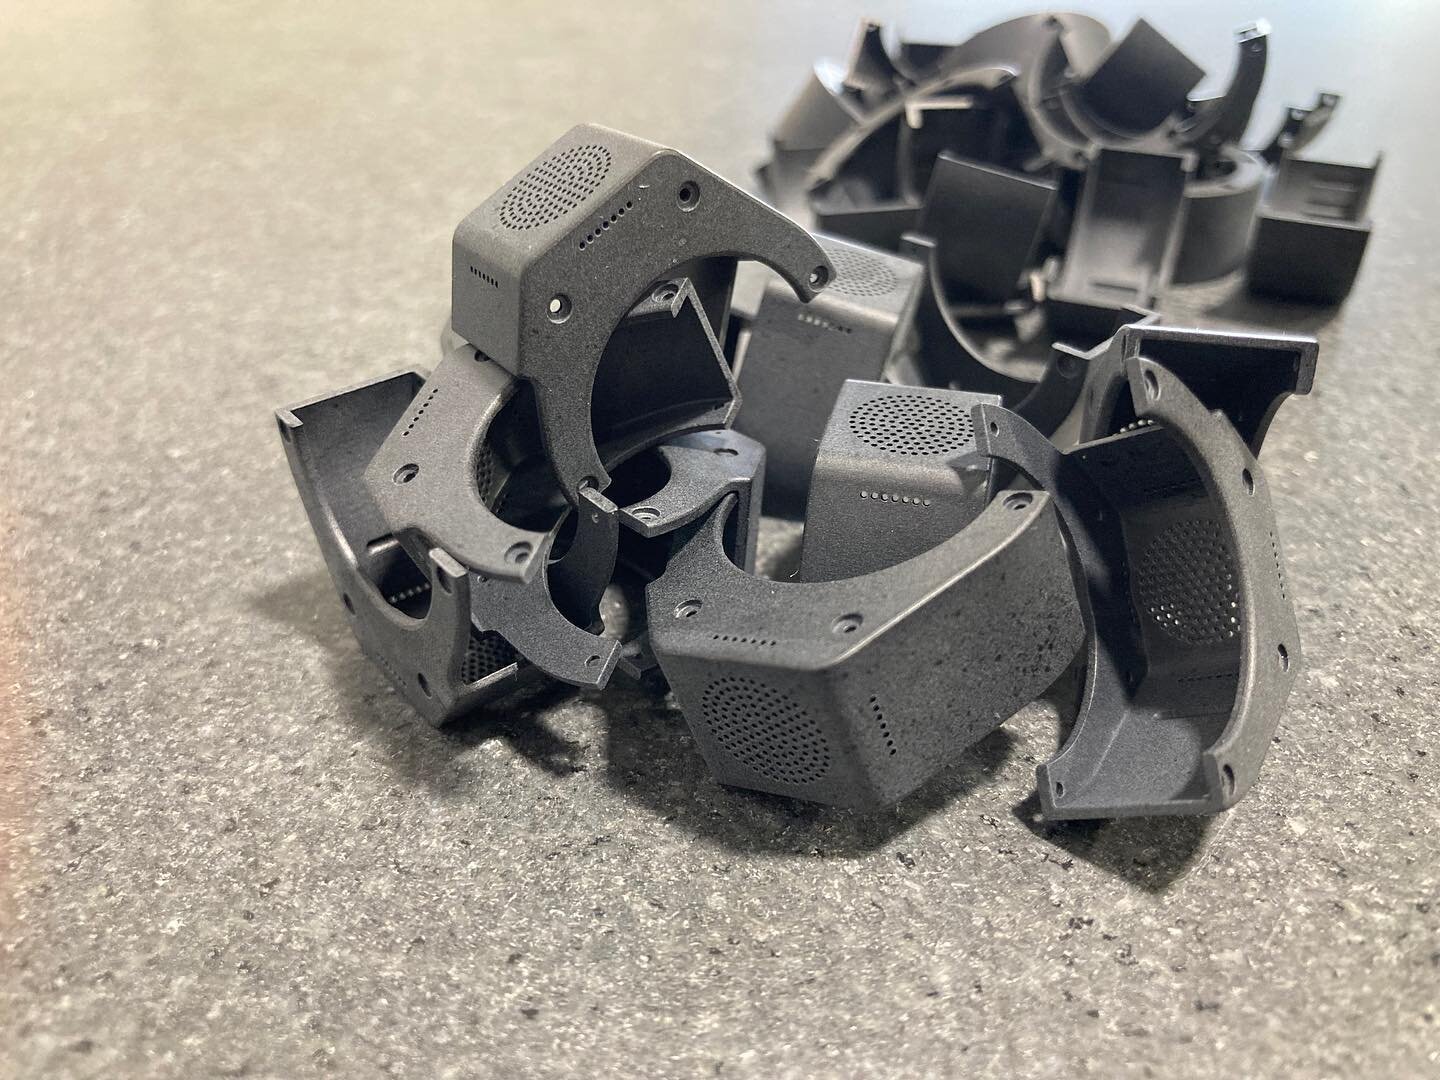 Here's a pile of black polycarbonate parts we machined last week. We specialize in prototypes and short run production of parts just like these! At first blush you might think these were injection molded. Nope, just machined from a whole lot of sides